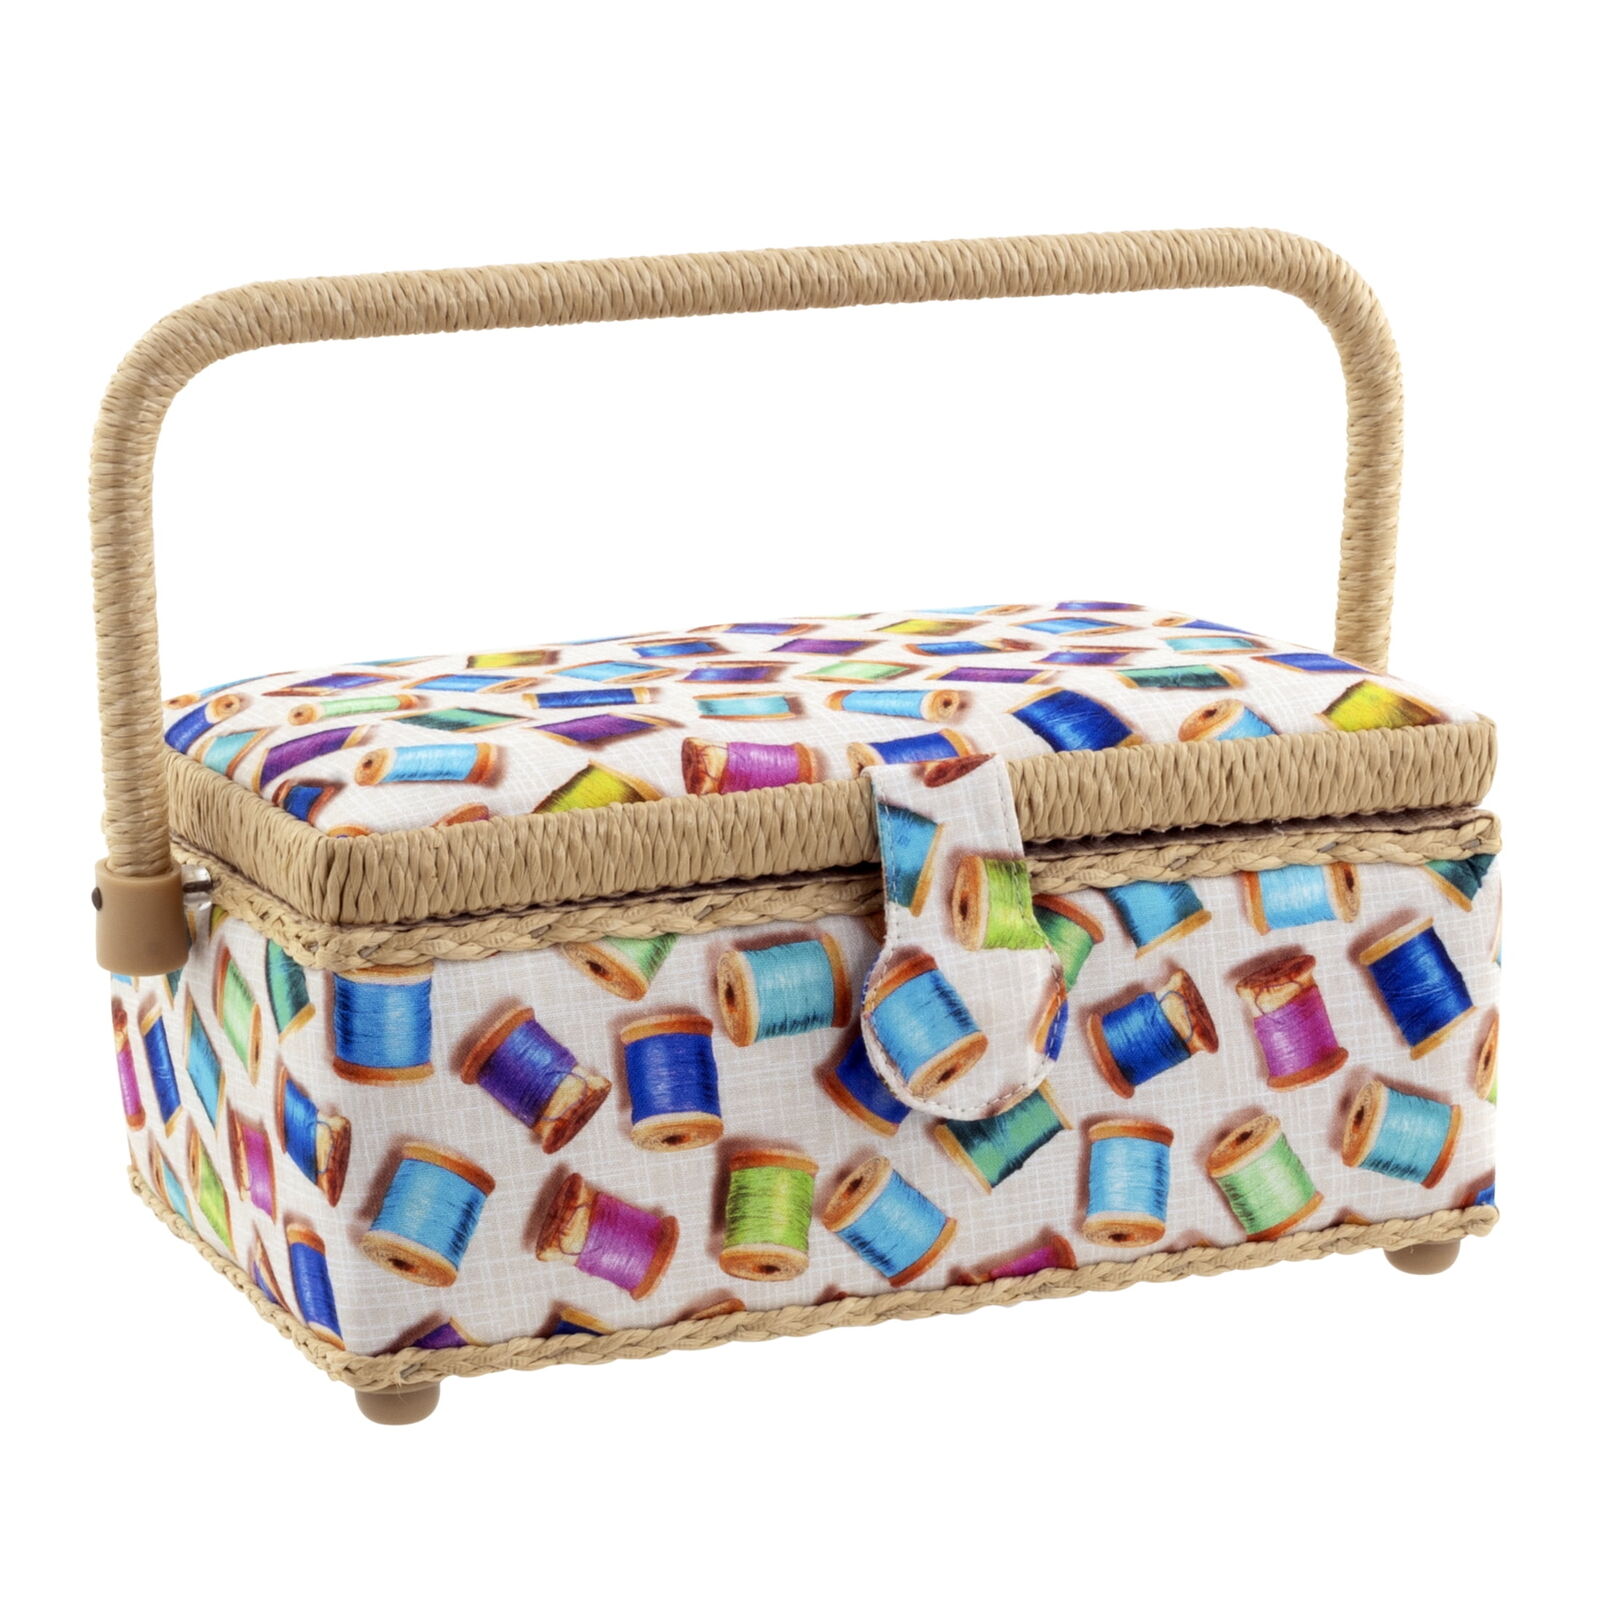 Small Sewing Basket, Colorful Thread Spools with Cord Wrapped Handle